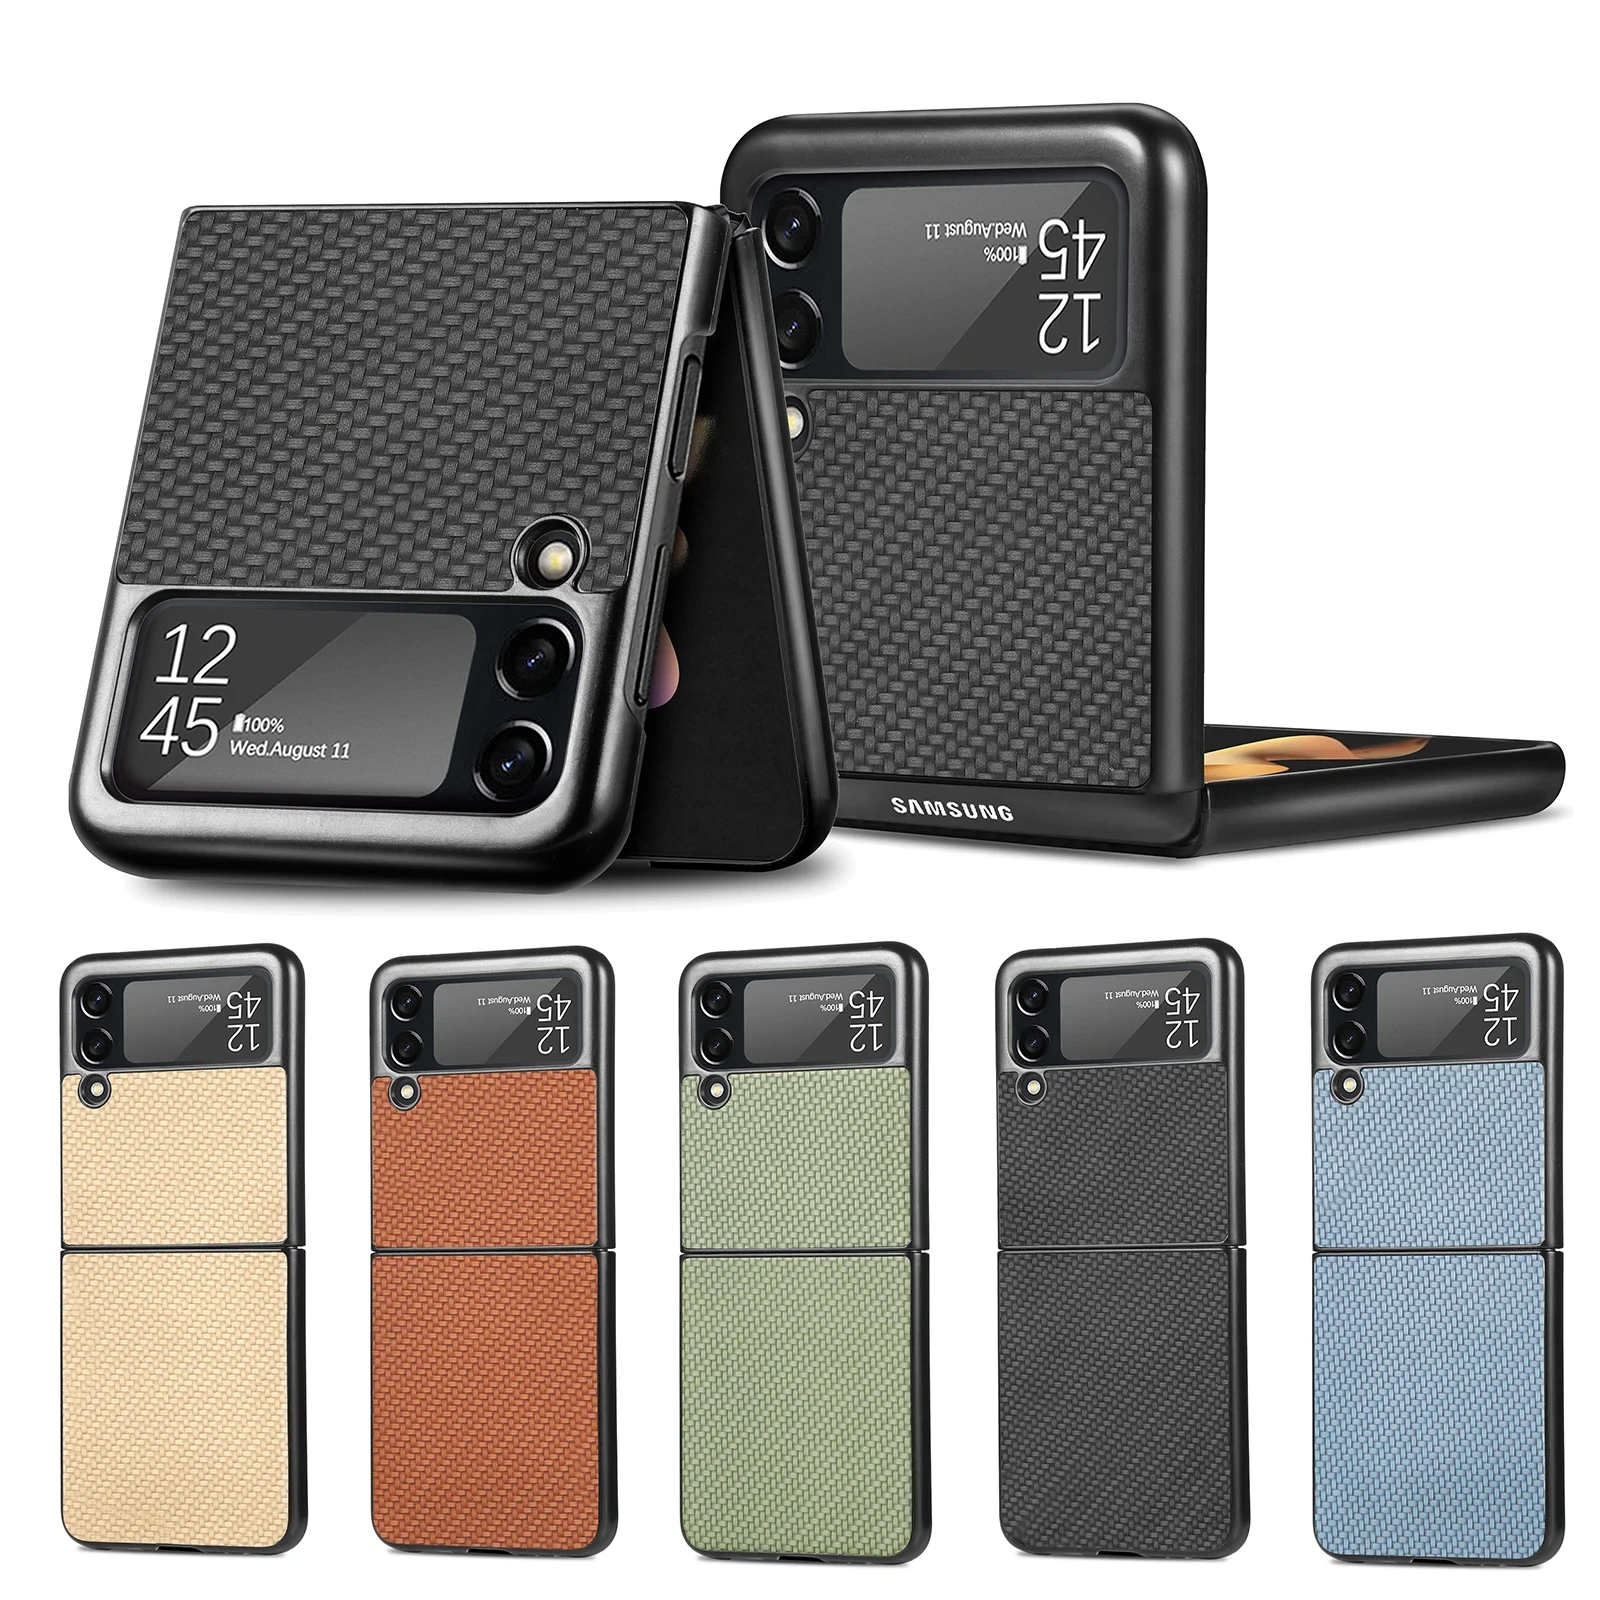 Luxury Carbon Fiber Slim Case for Samsung Galaxy Z Flip 3 5G Flip3 Anti-knock Cell Phone Protective Cover Coque